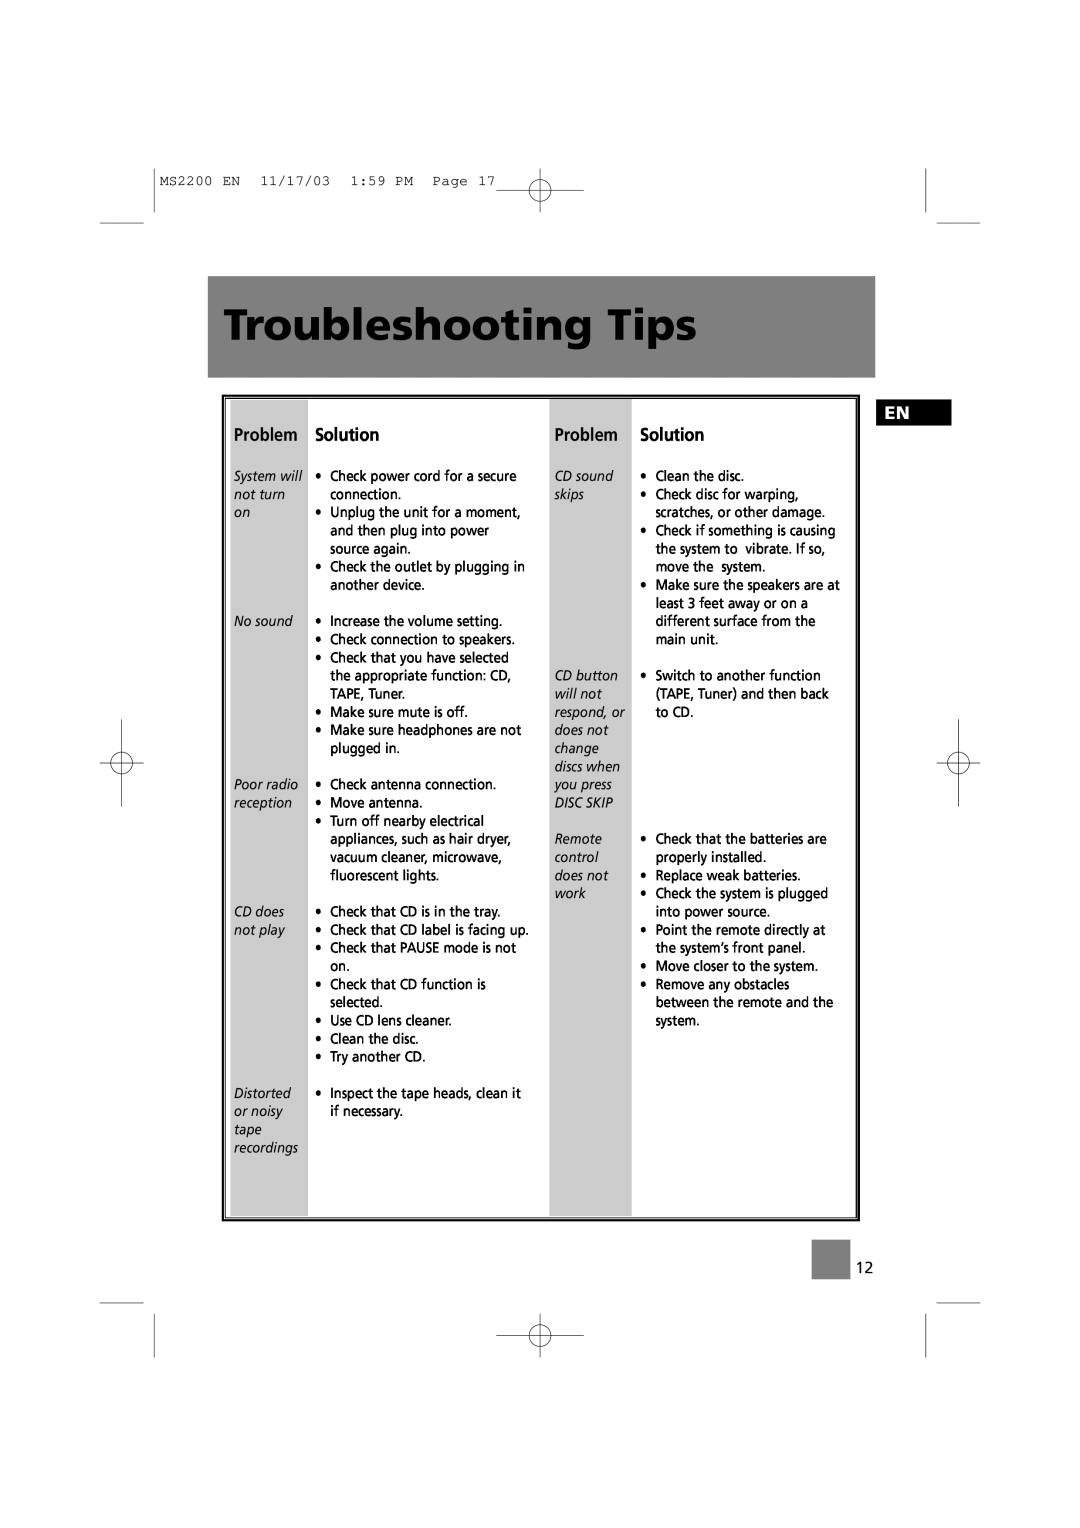 Technicolor - Thomson MS2200 manual Troubleshooting Tips, Problem, Solution 